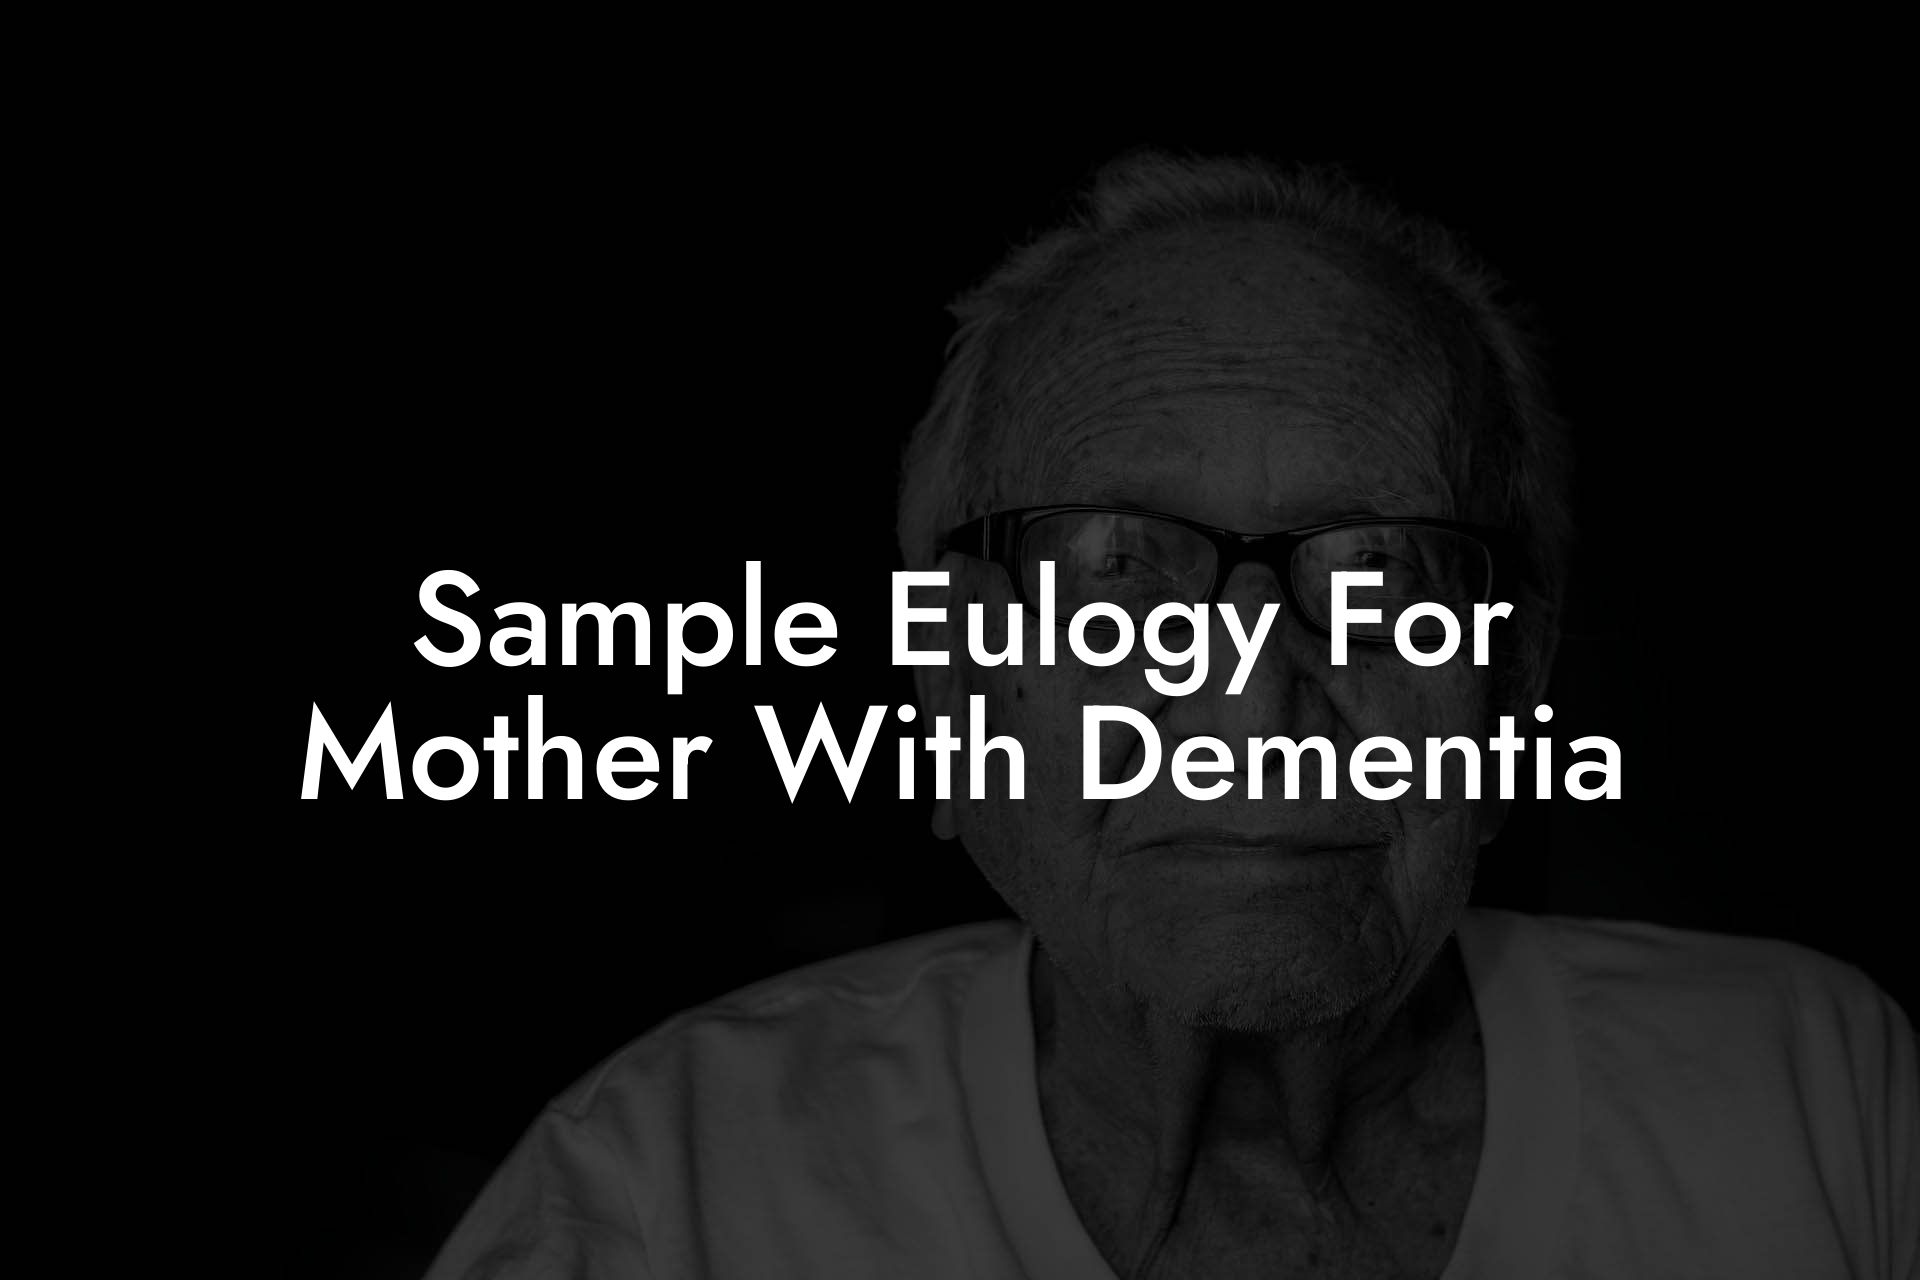 Sample Eulogy For Mother With Dementia